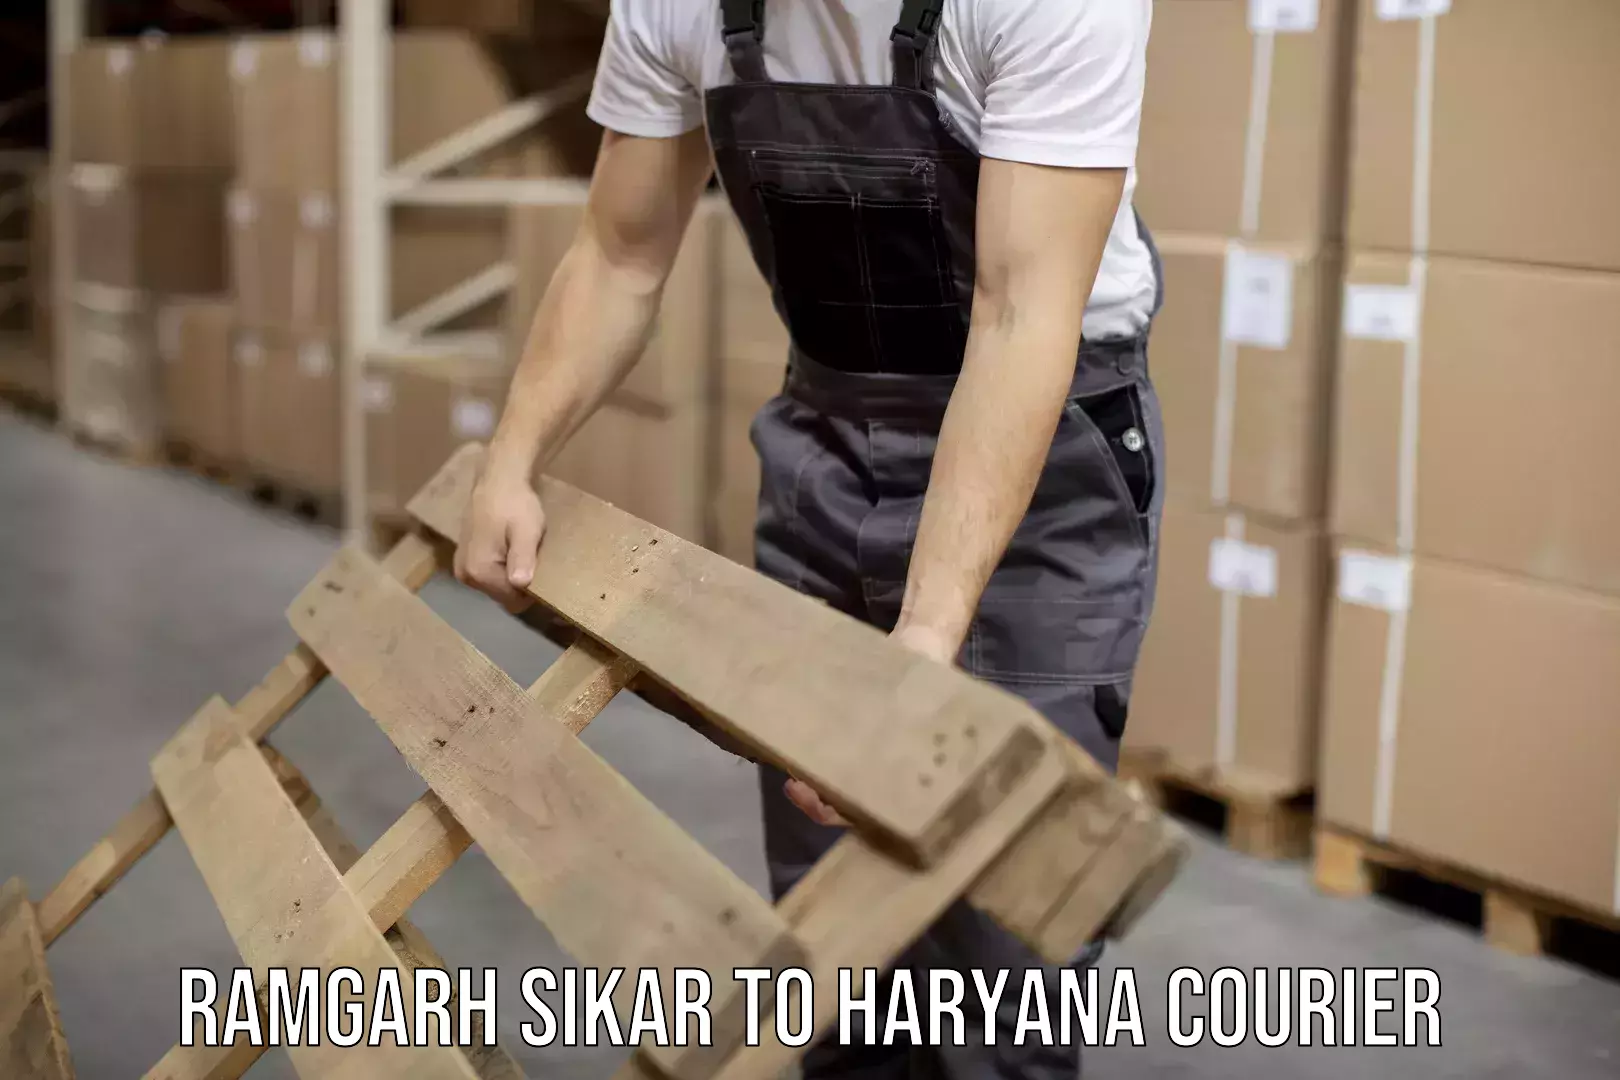 State-of-the-art courier technology Ramgarh Sikar to Bilaspur Haryana